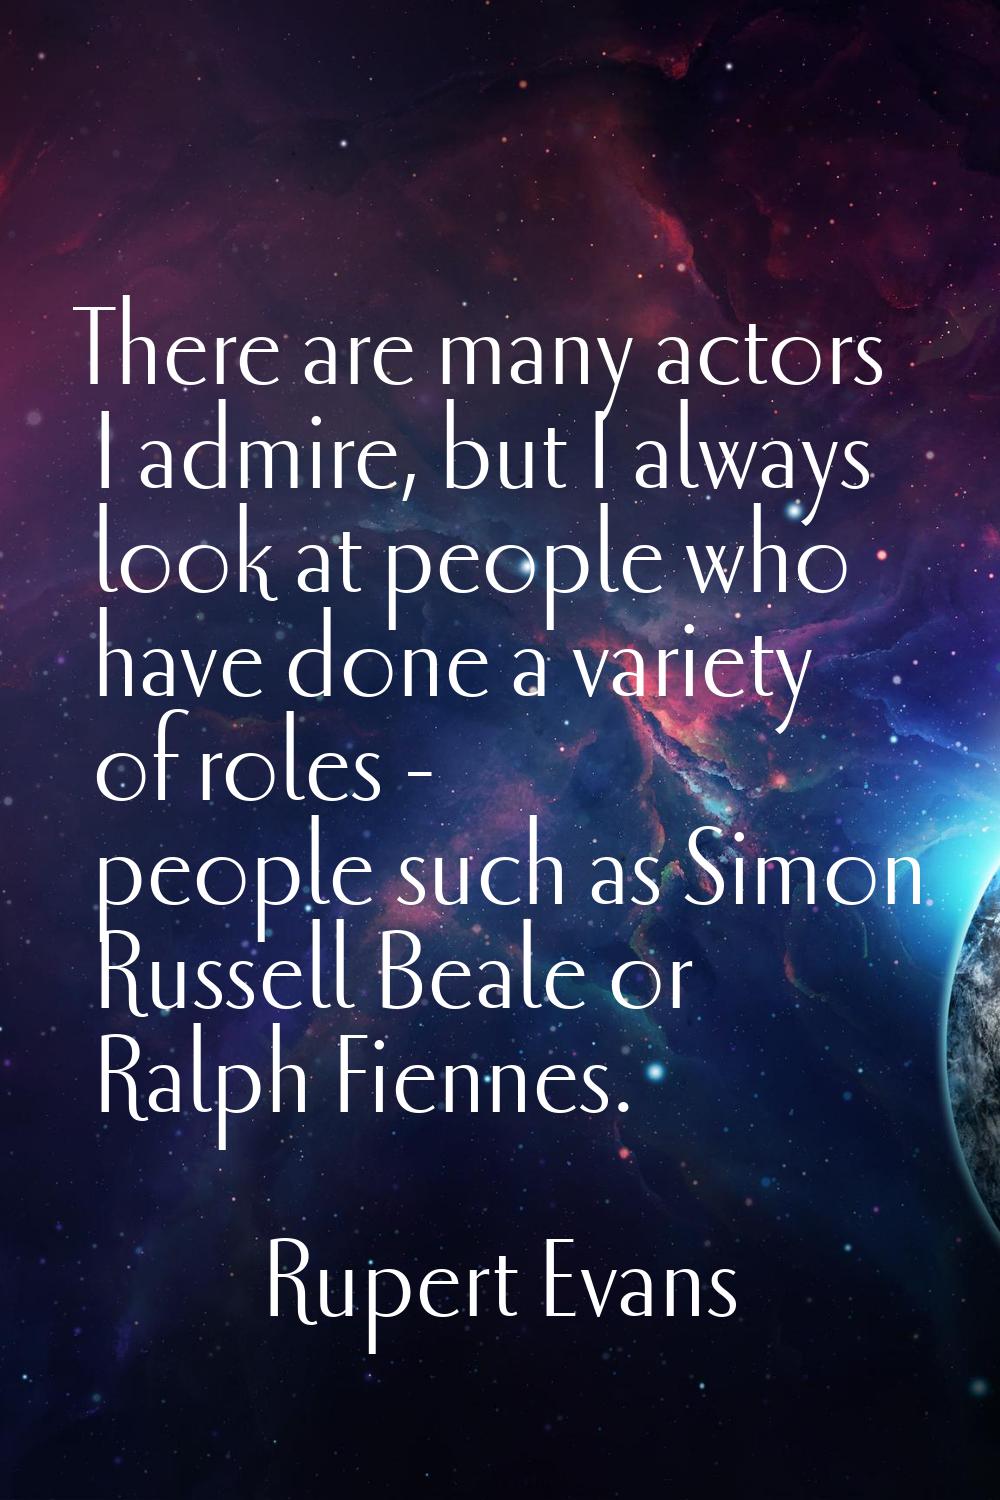 There are many actors I admire, but I always look at people who have done a variety of roles - peop